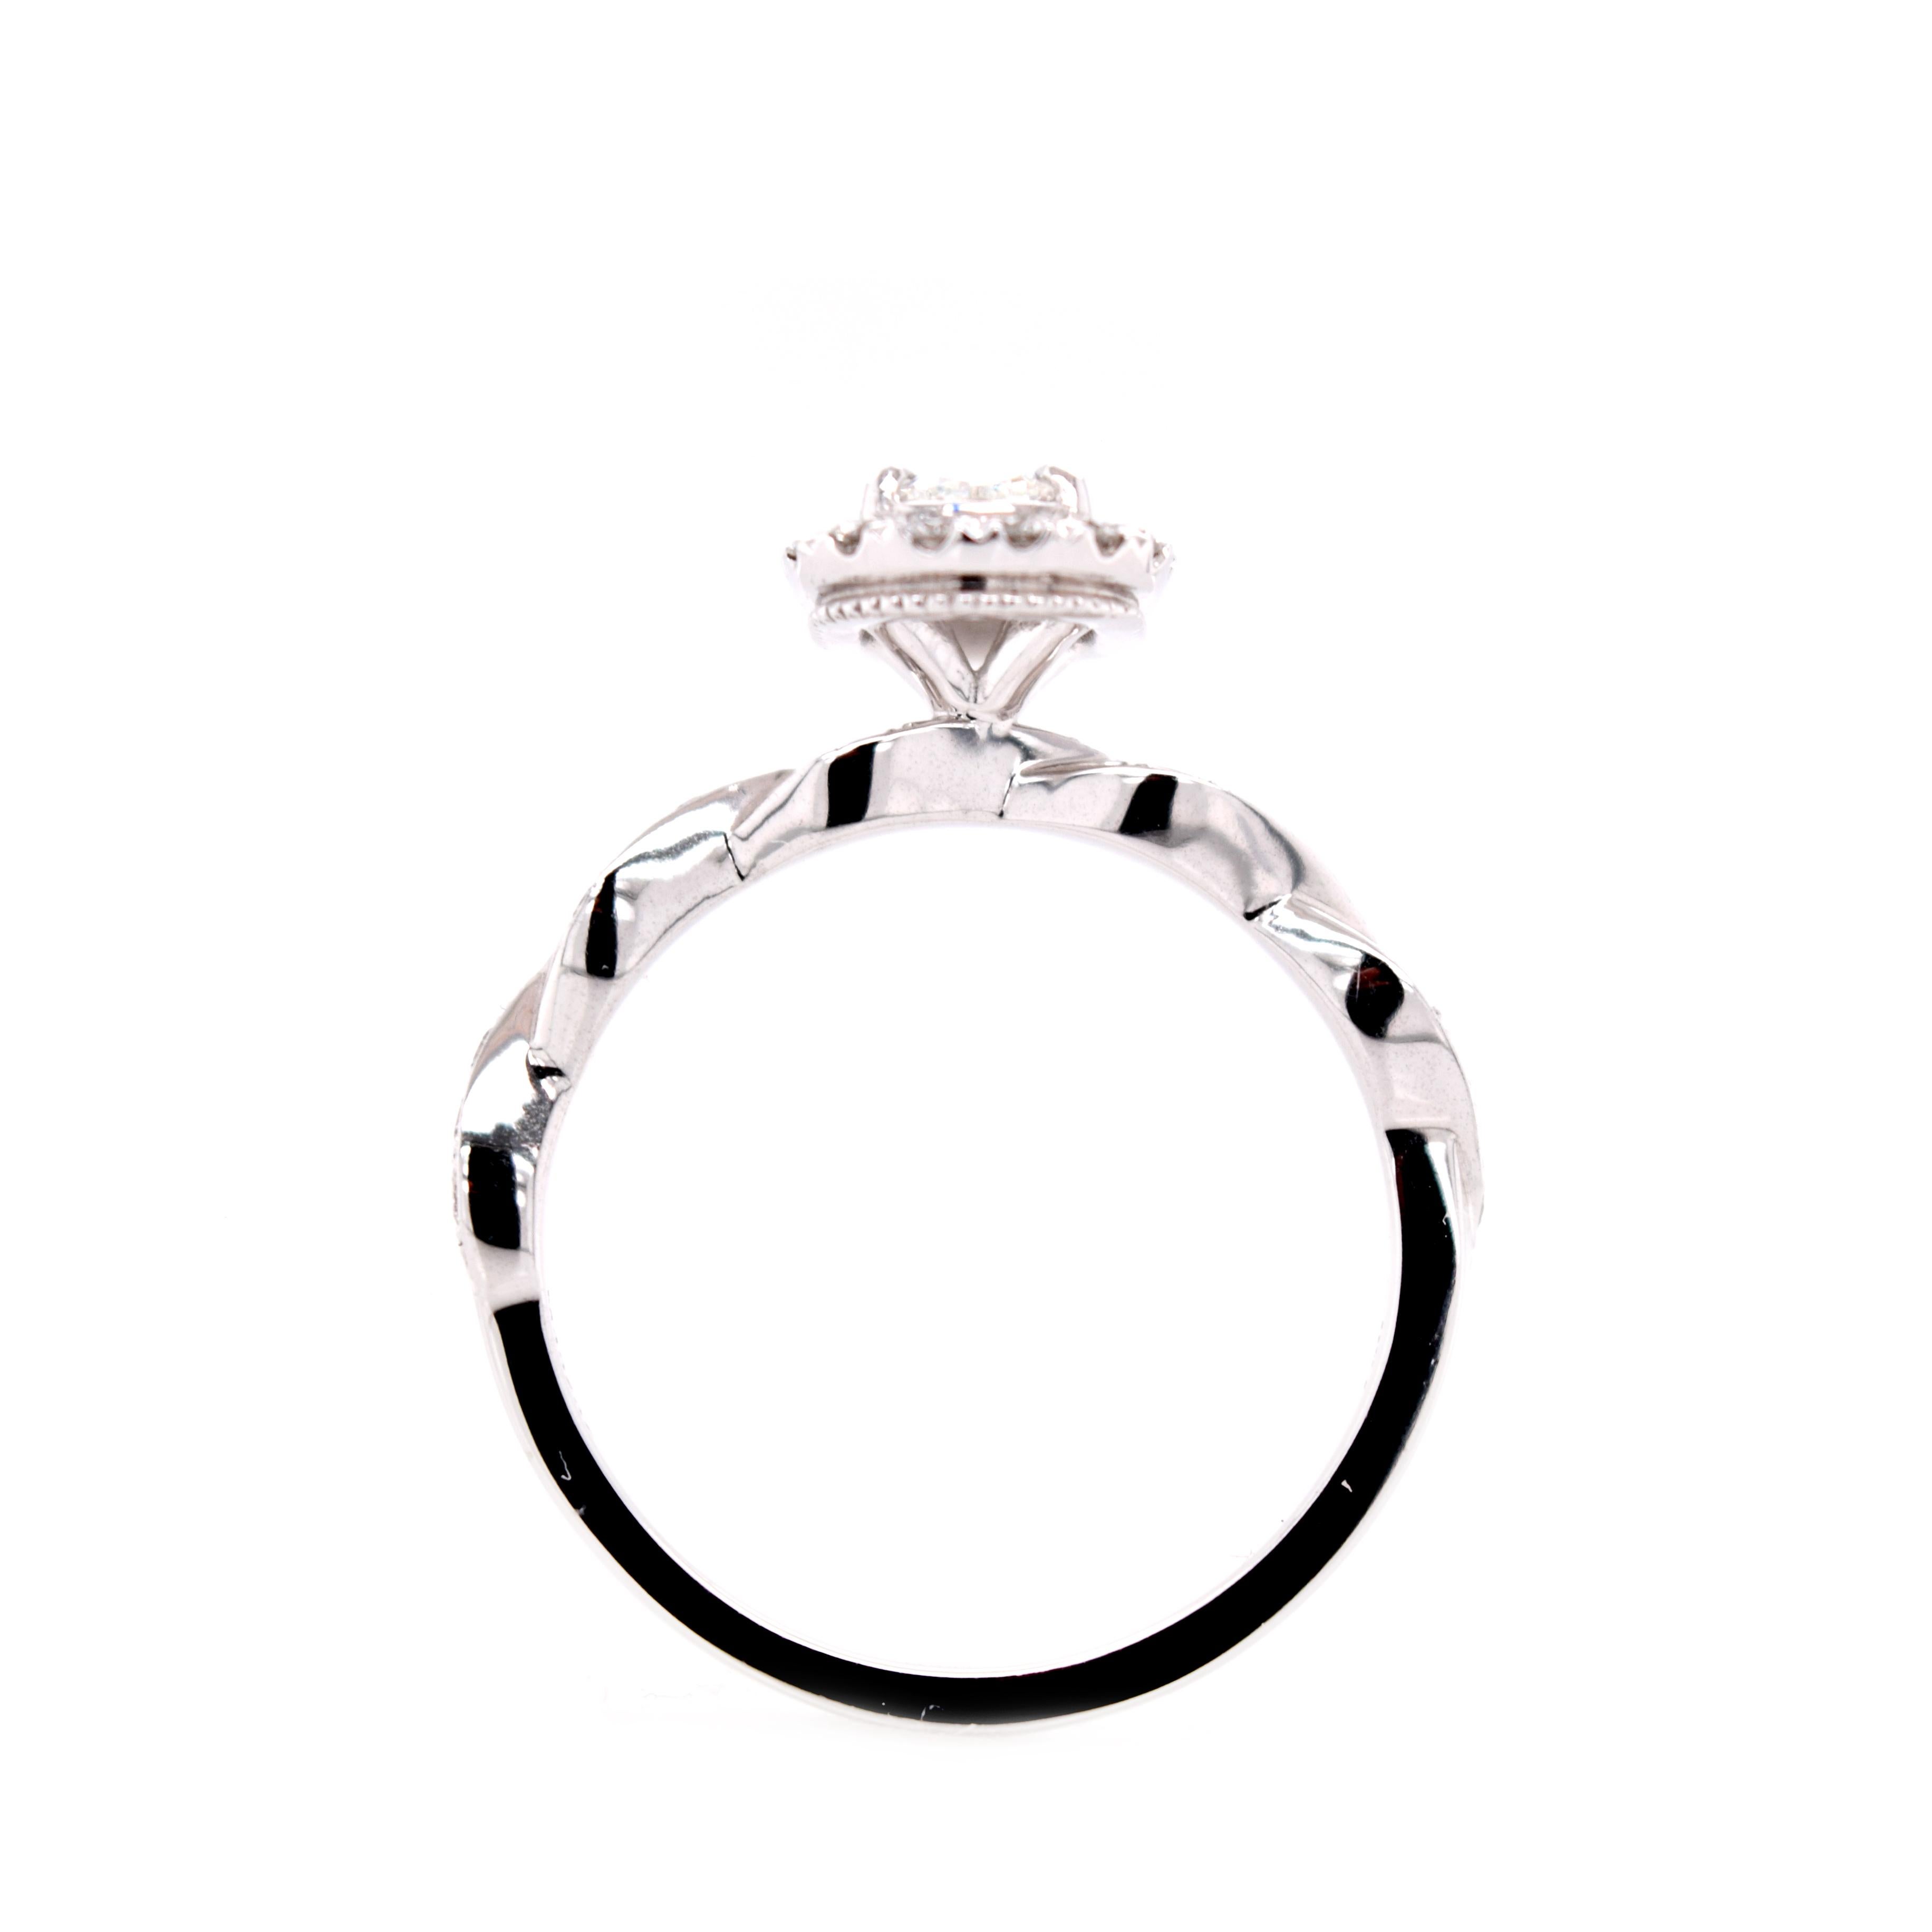 The Criss Cut diamond by Christopher Design has superior fire and brilliance.   
This is a new version of the emerald cut diamond -  known for it's step cut though the Criss Cut has more facets than a regular emerald diamond. This special cut looks